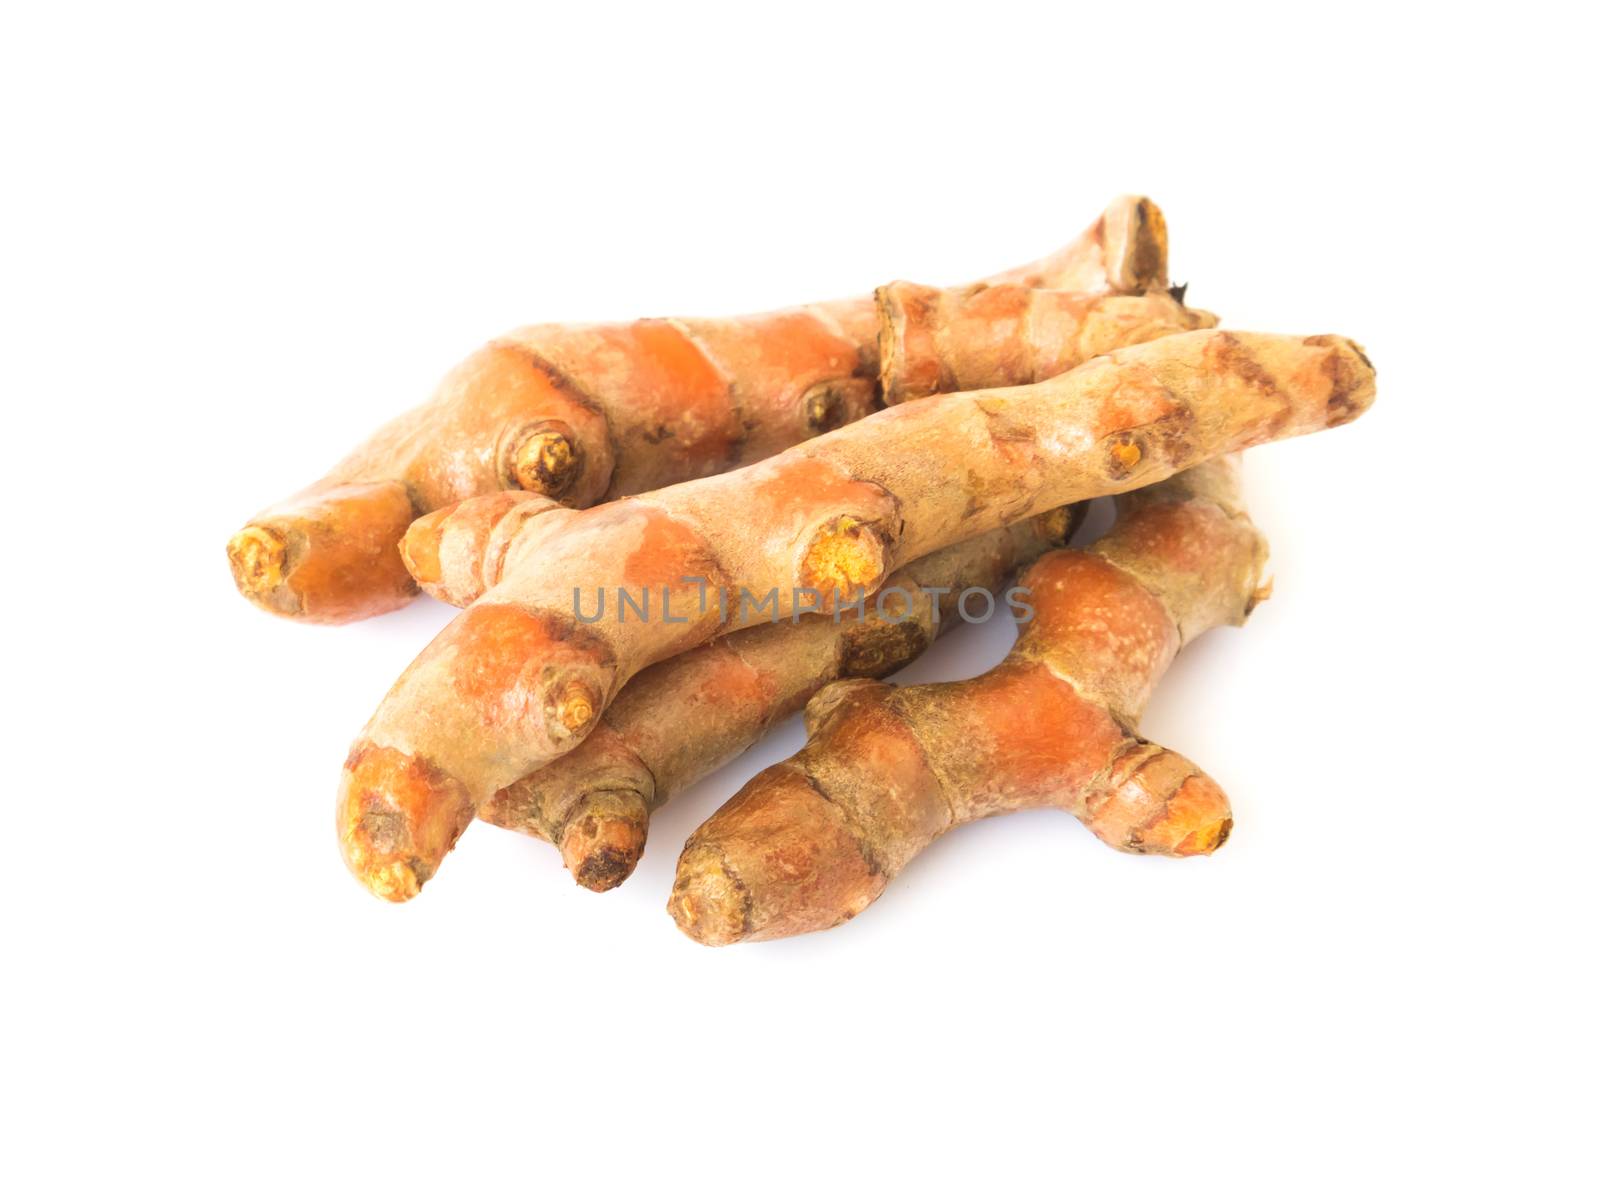 Fresh turmeric roots on white background, herb and healthy care concept